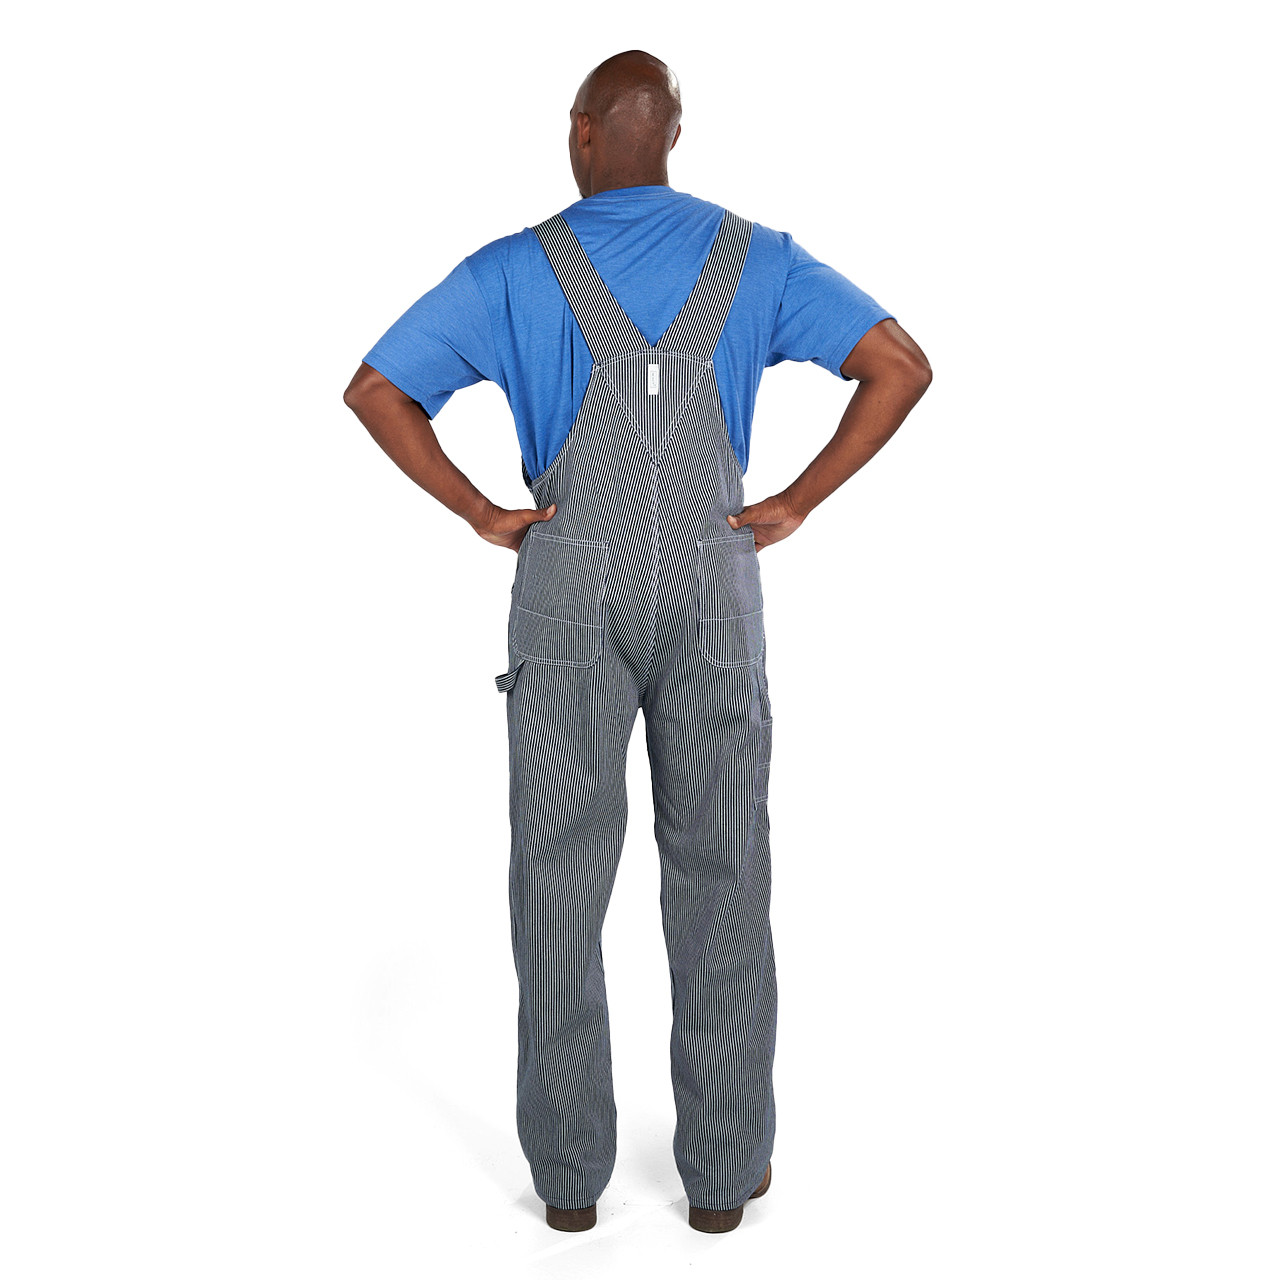 https://cdn11.bigcommerce.com/s-r4f6haoaux/images/stencil/1280x1280/products/361/2747/273-47-hickory-stripe-overalls-blue-white-KEY-back__49526.1695419557.jpg?c=1